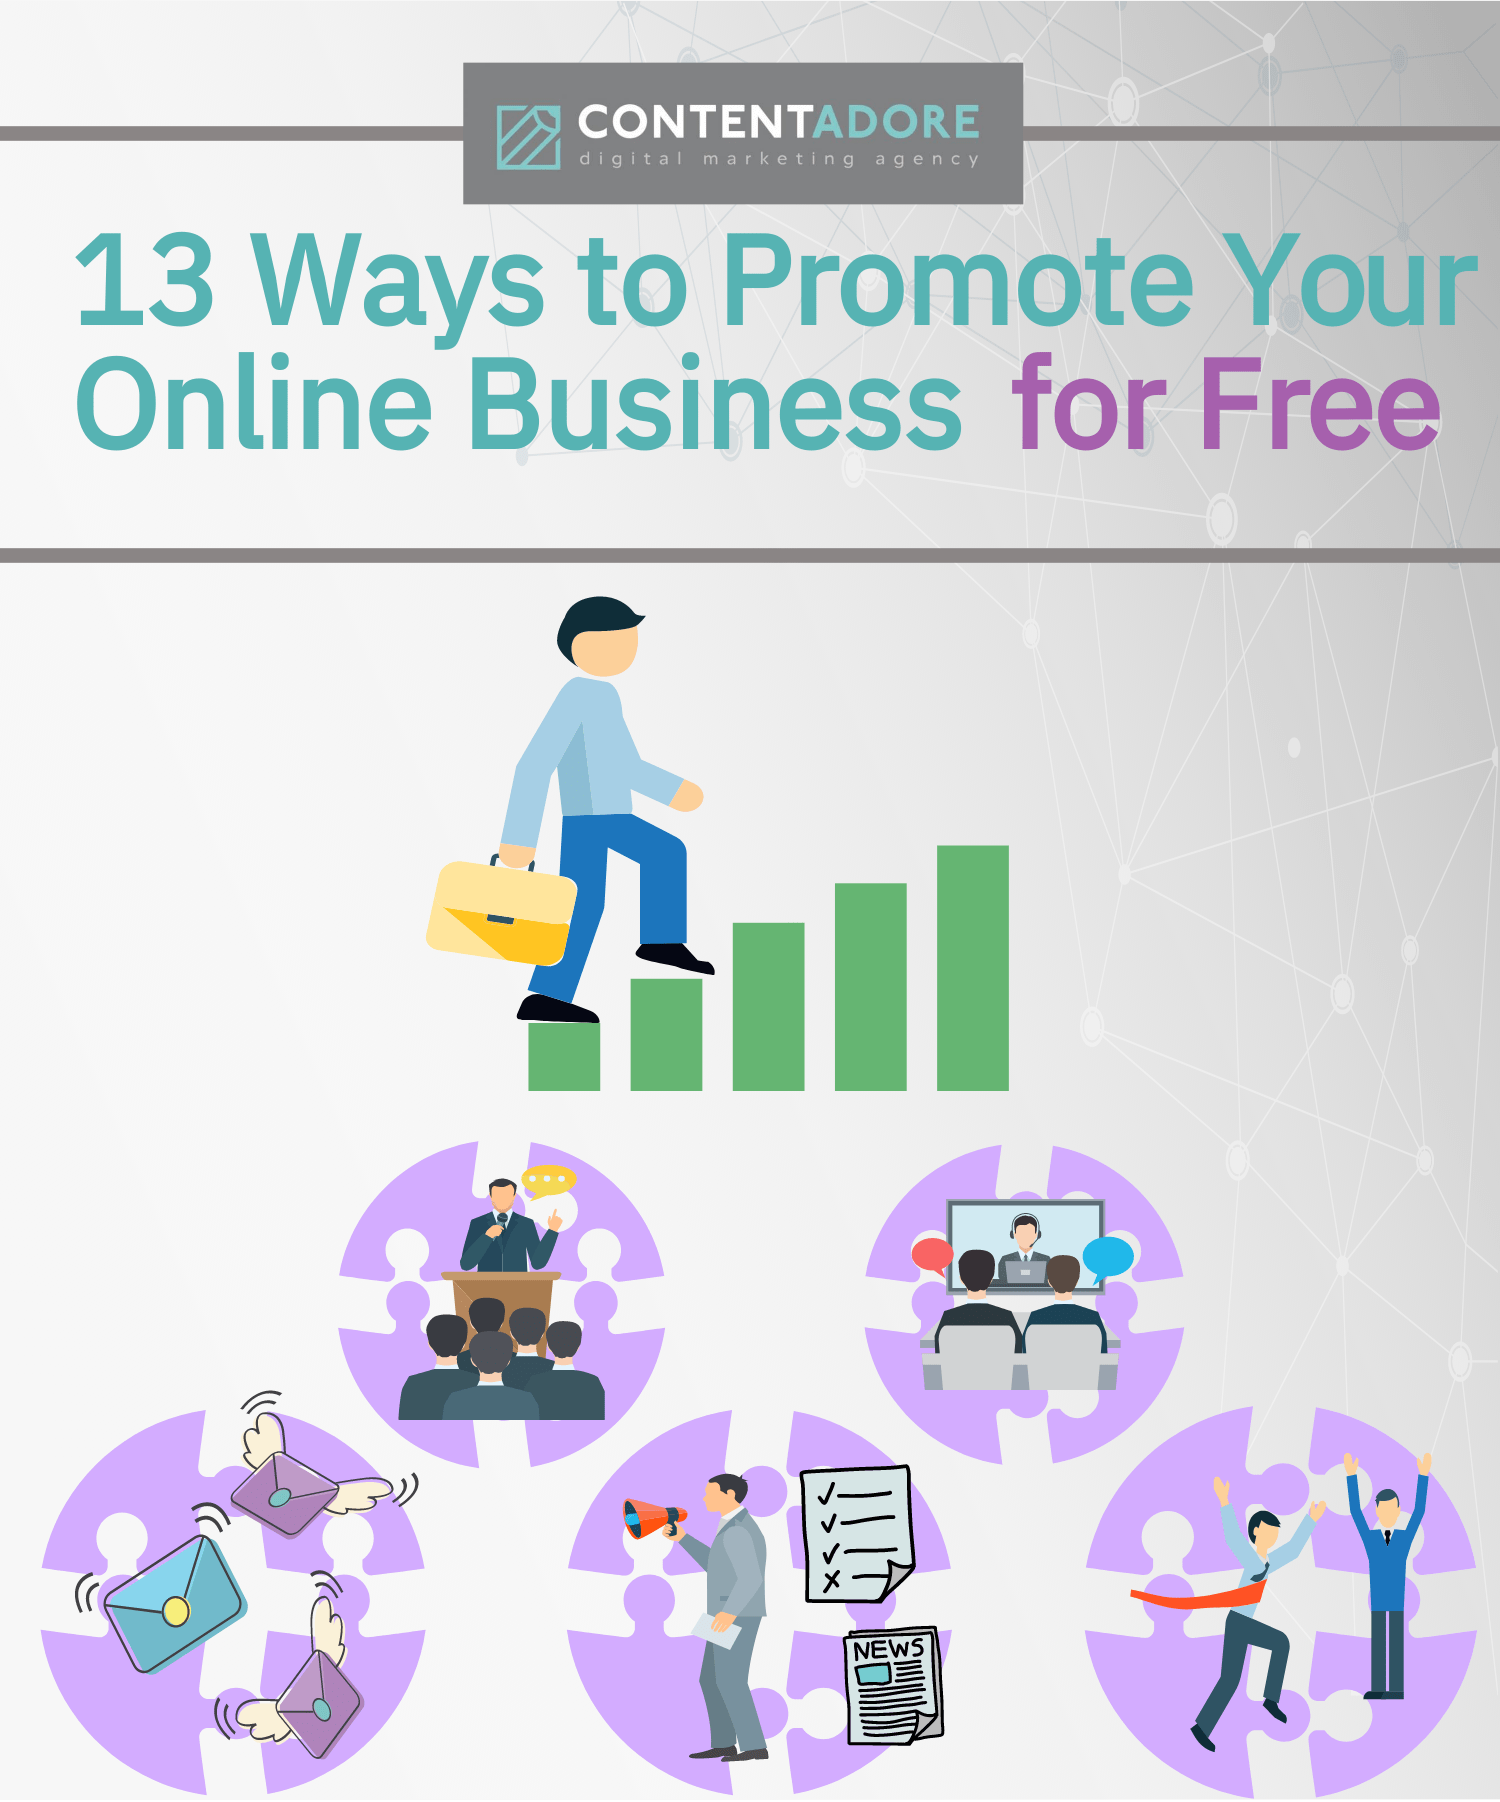 13 Ways to Promote Your Online Business for Free